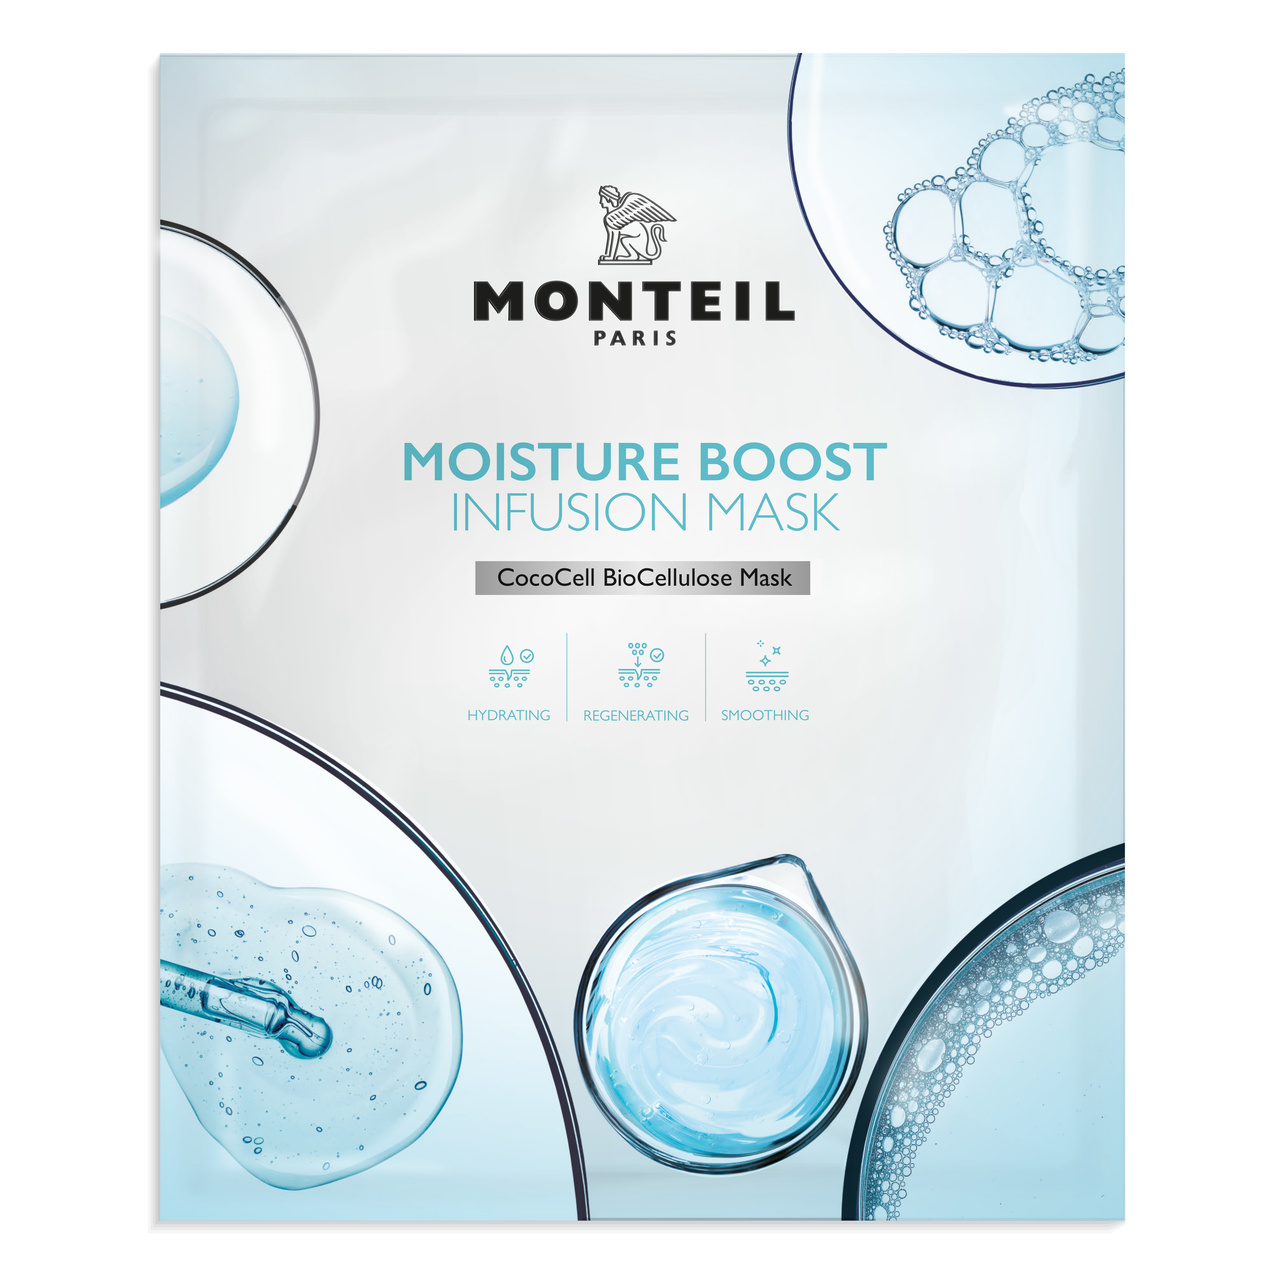 Moisture Boost Infusion Mask